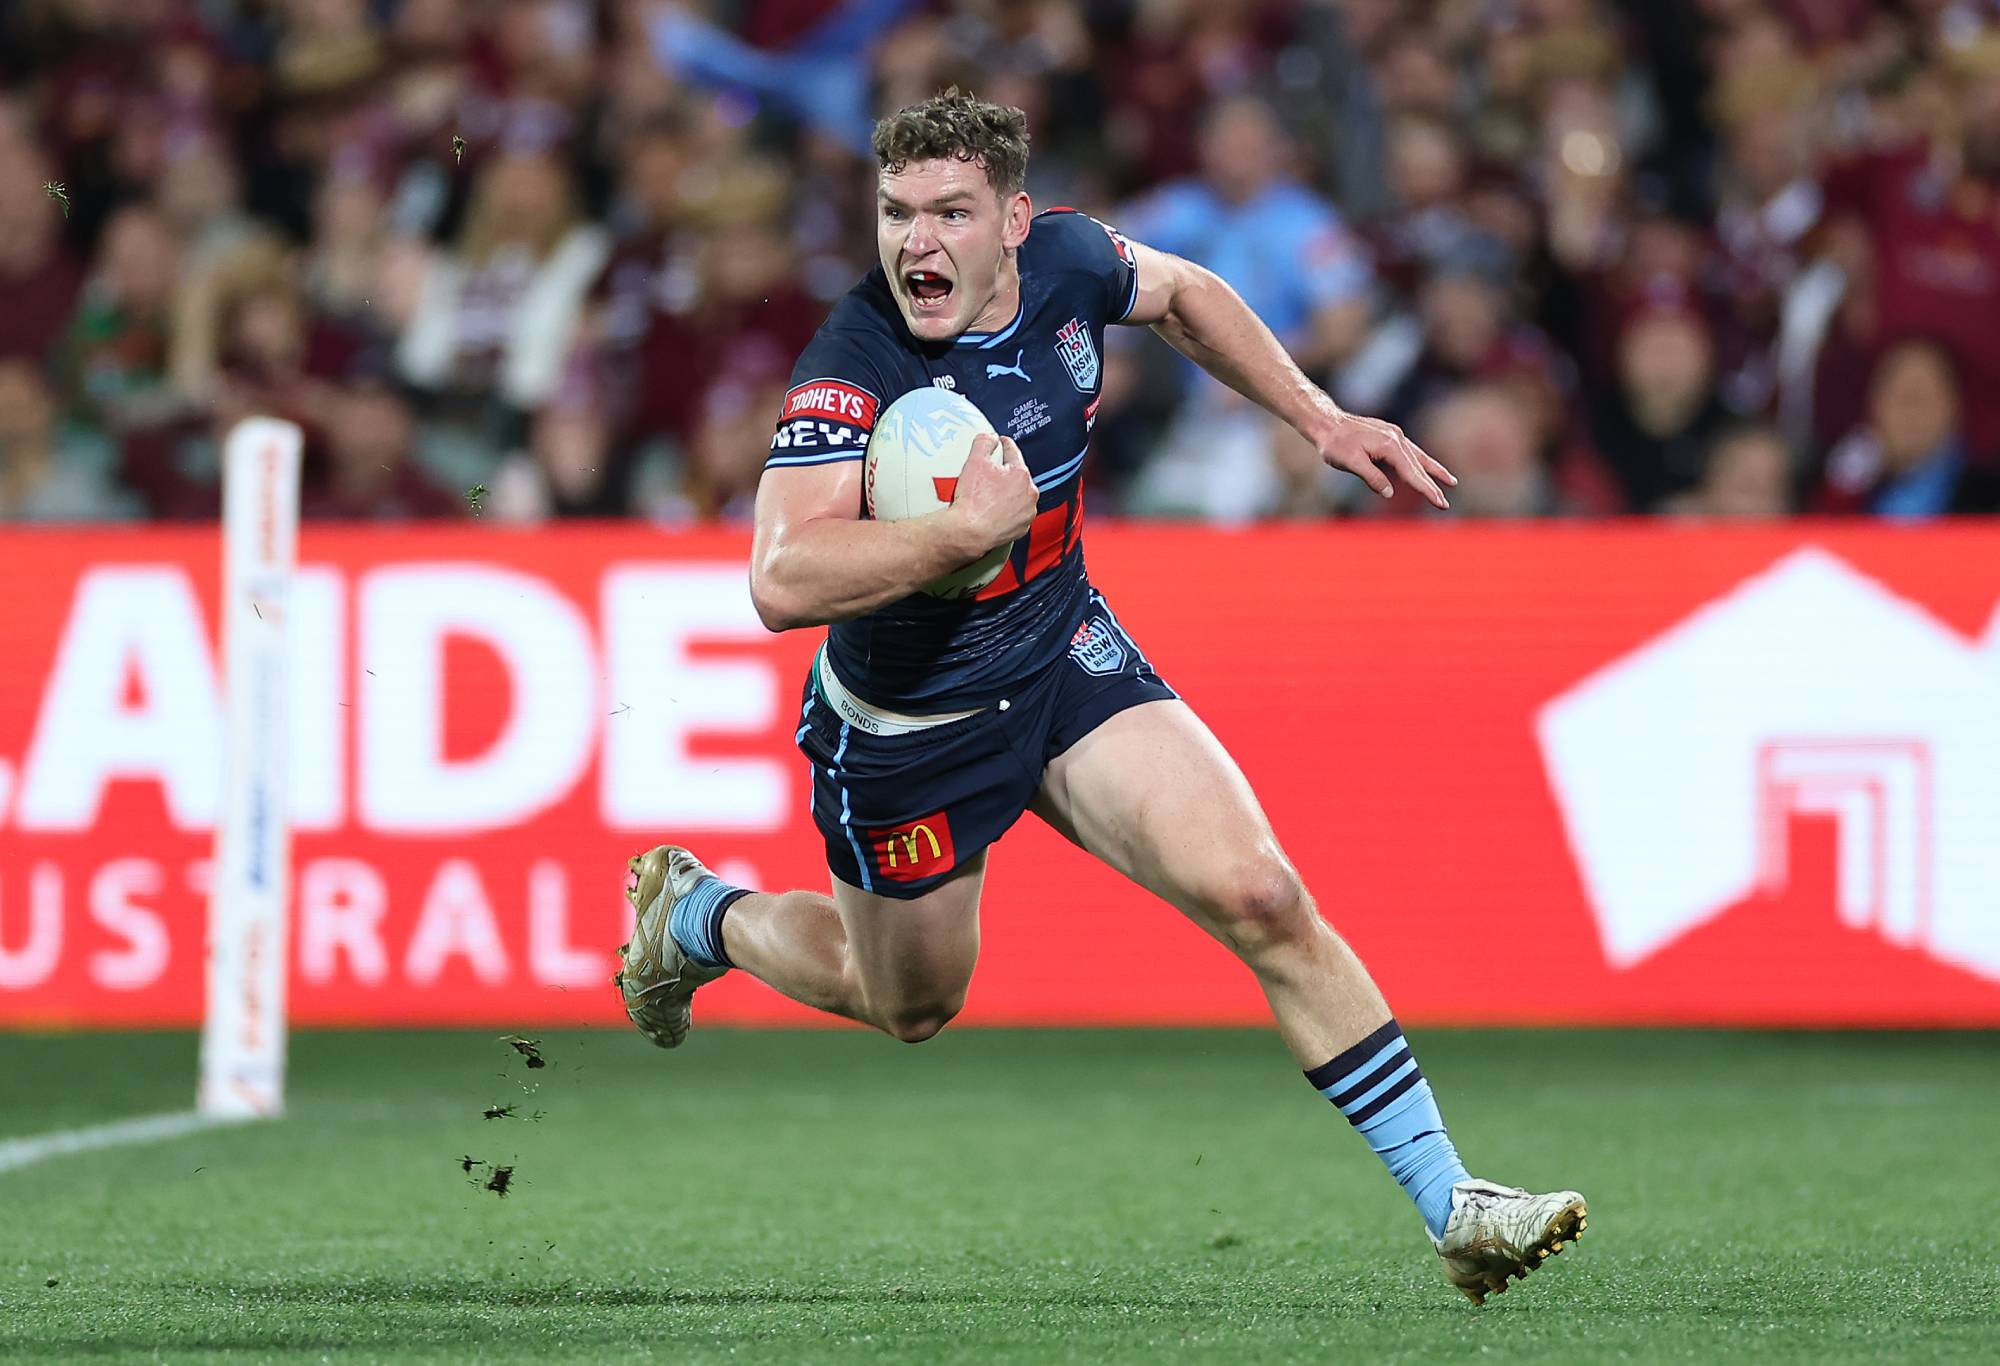 Liam Martin of the Blues scores a try during game one of the 2023 State of Origin series between the Queensland Maroons and New South Wales Blues at Adelaide Oval on May 31, 2023 in Adelaide, Australia. (Photo by Cameron Spencer/Getty Images)